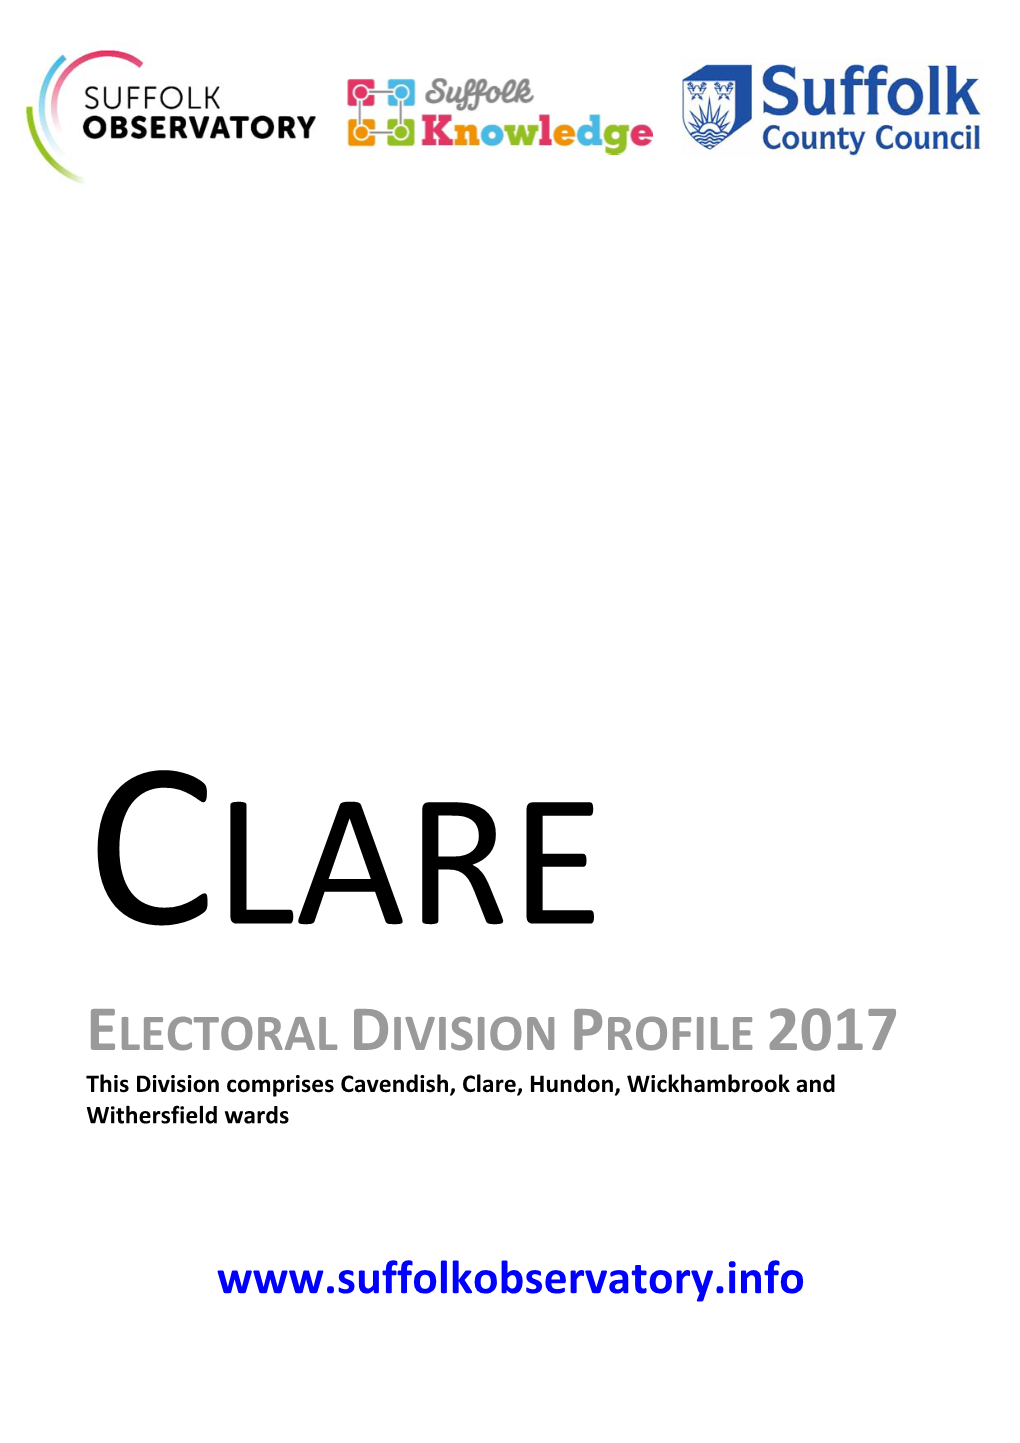 ELECTORAL DIVISION PROFILE 2017 This Division Comprises Cavendish, Clare, Hundon, Wickhambrook and Withersfield Wards